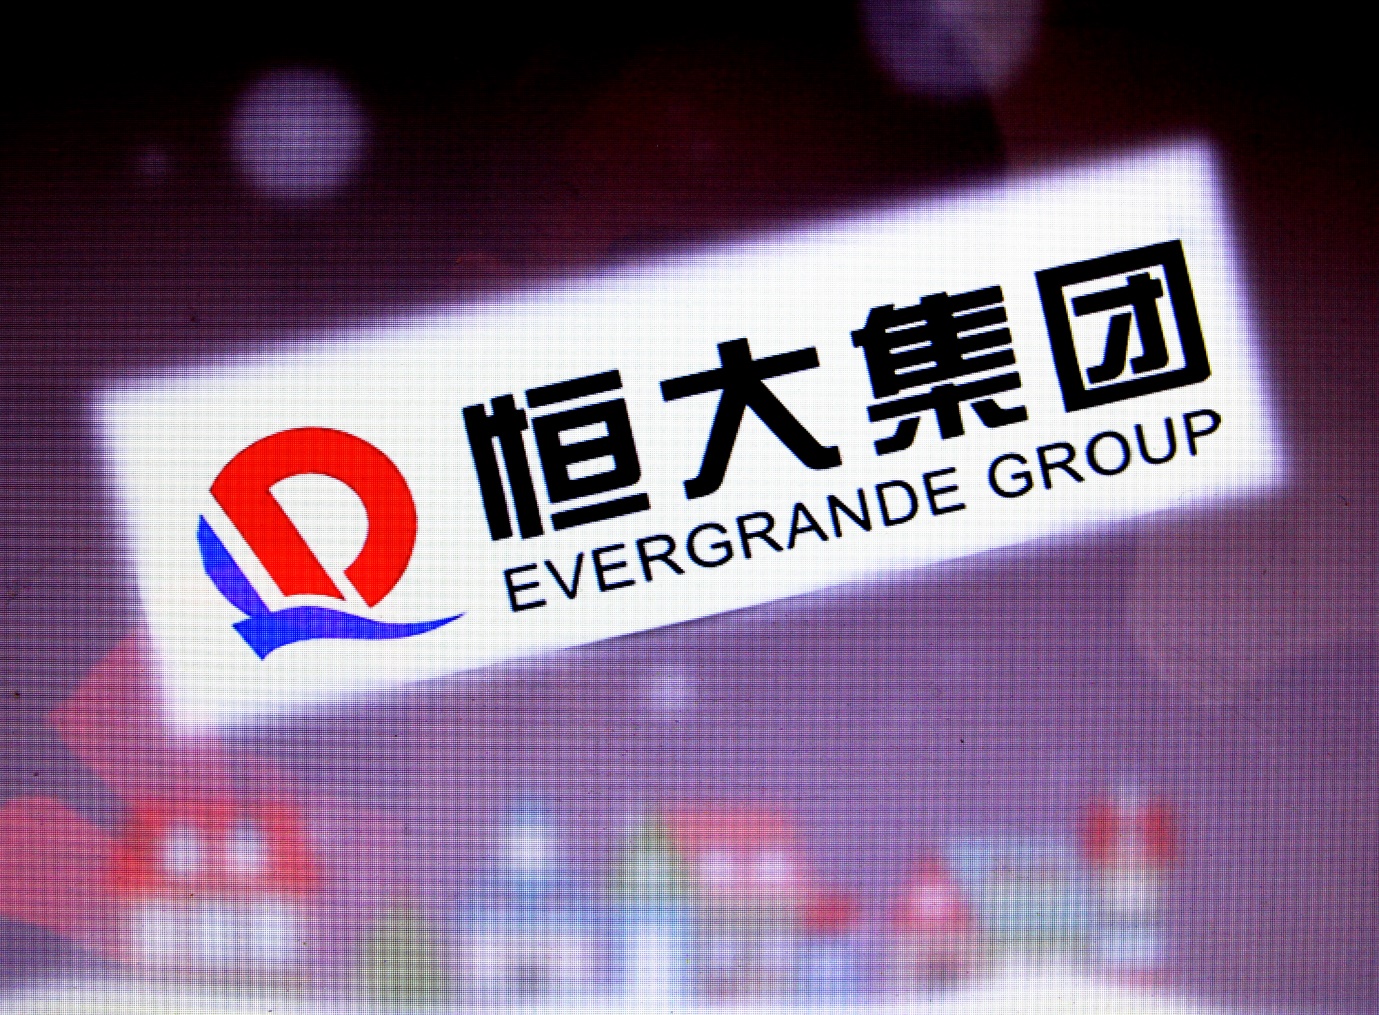 How The World Can Avoid the Next Evergrande Group Crisis